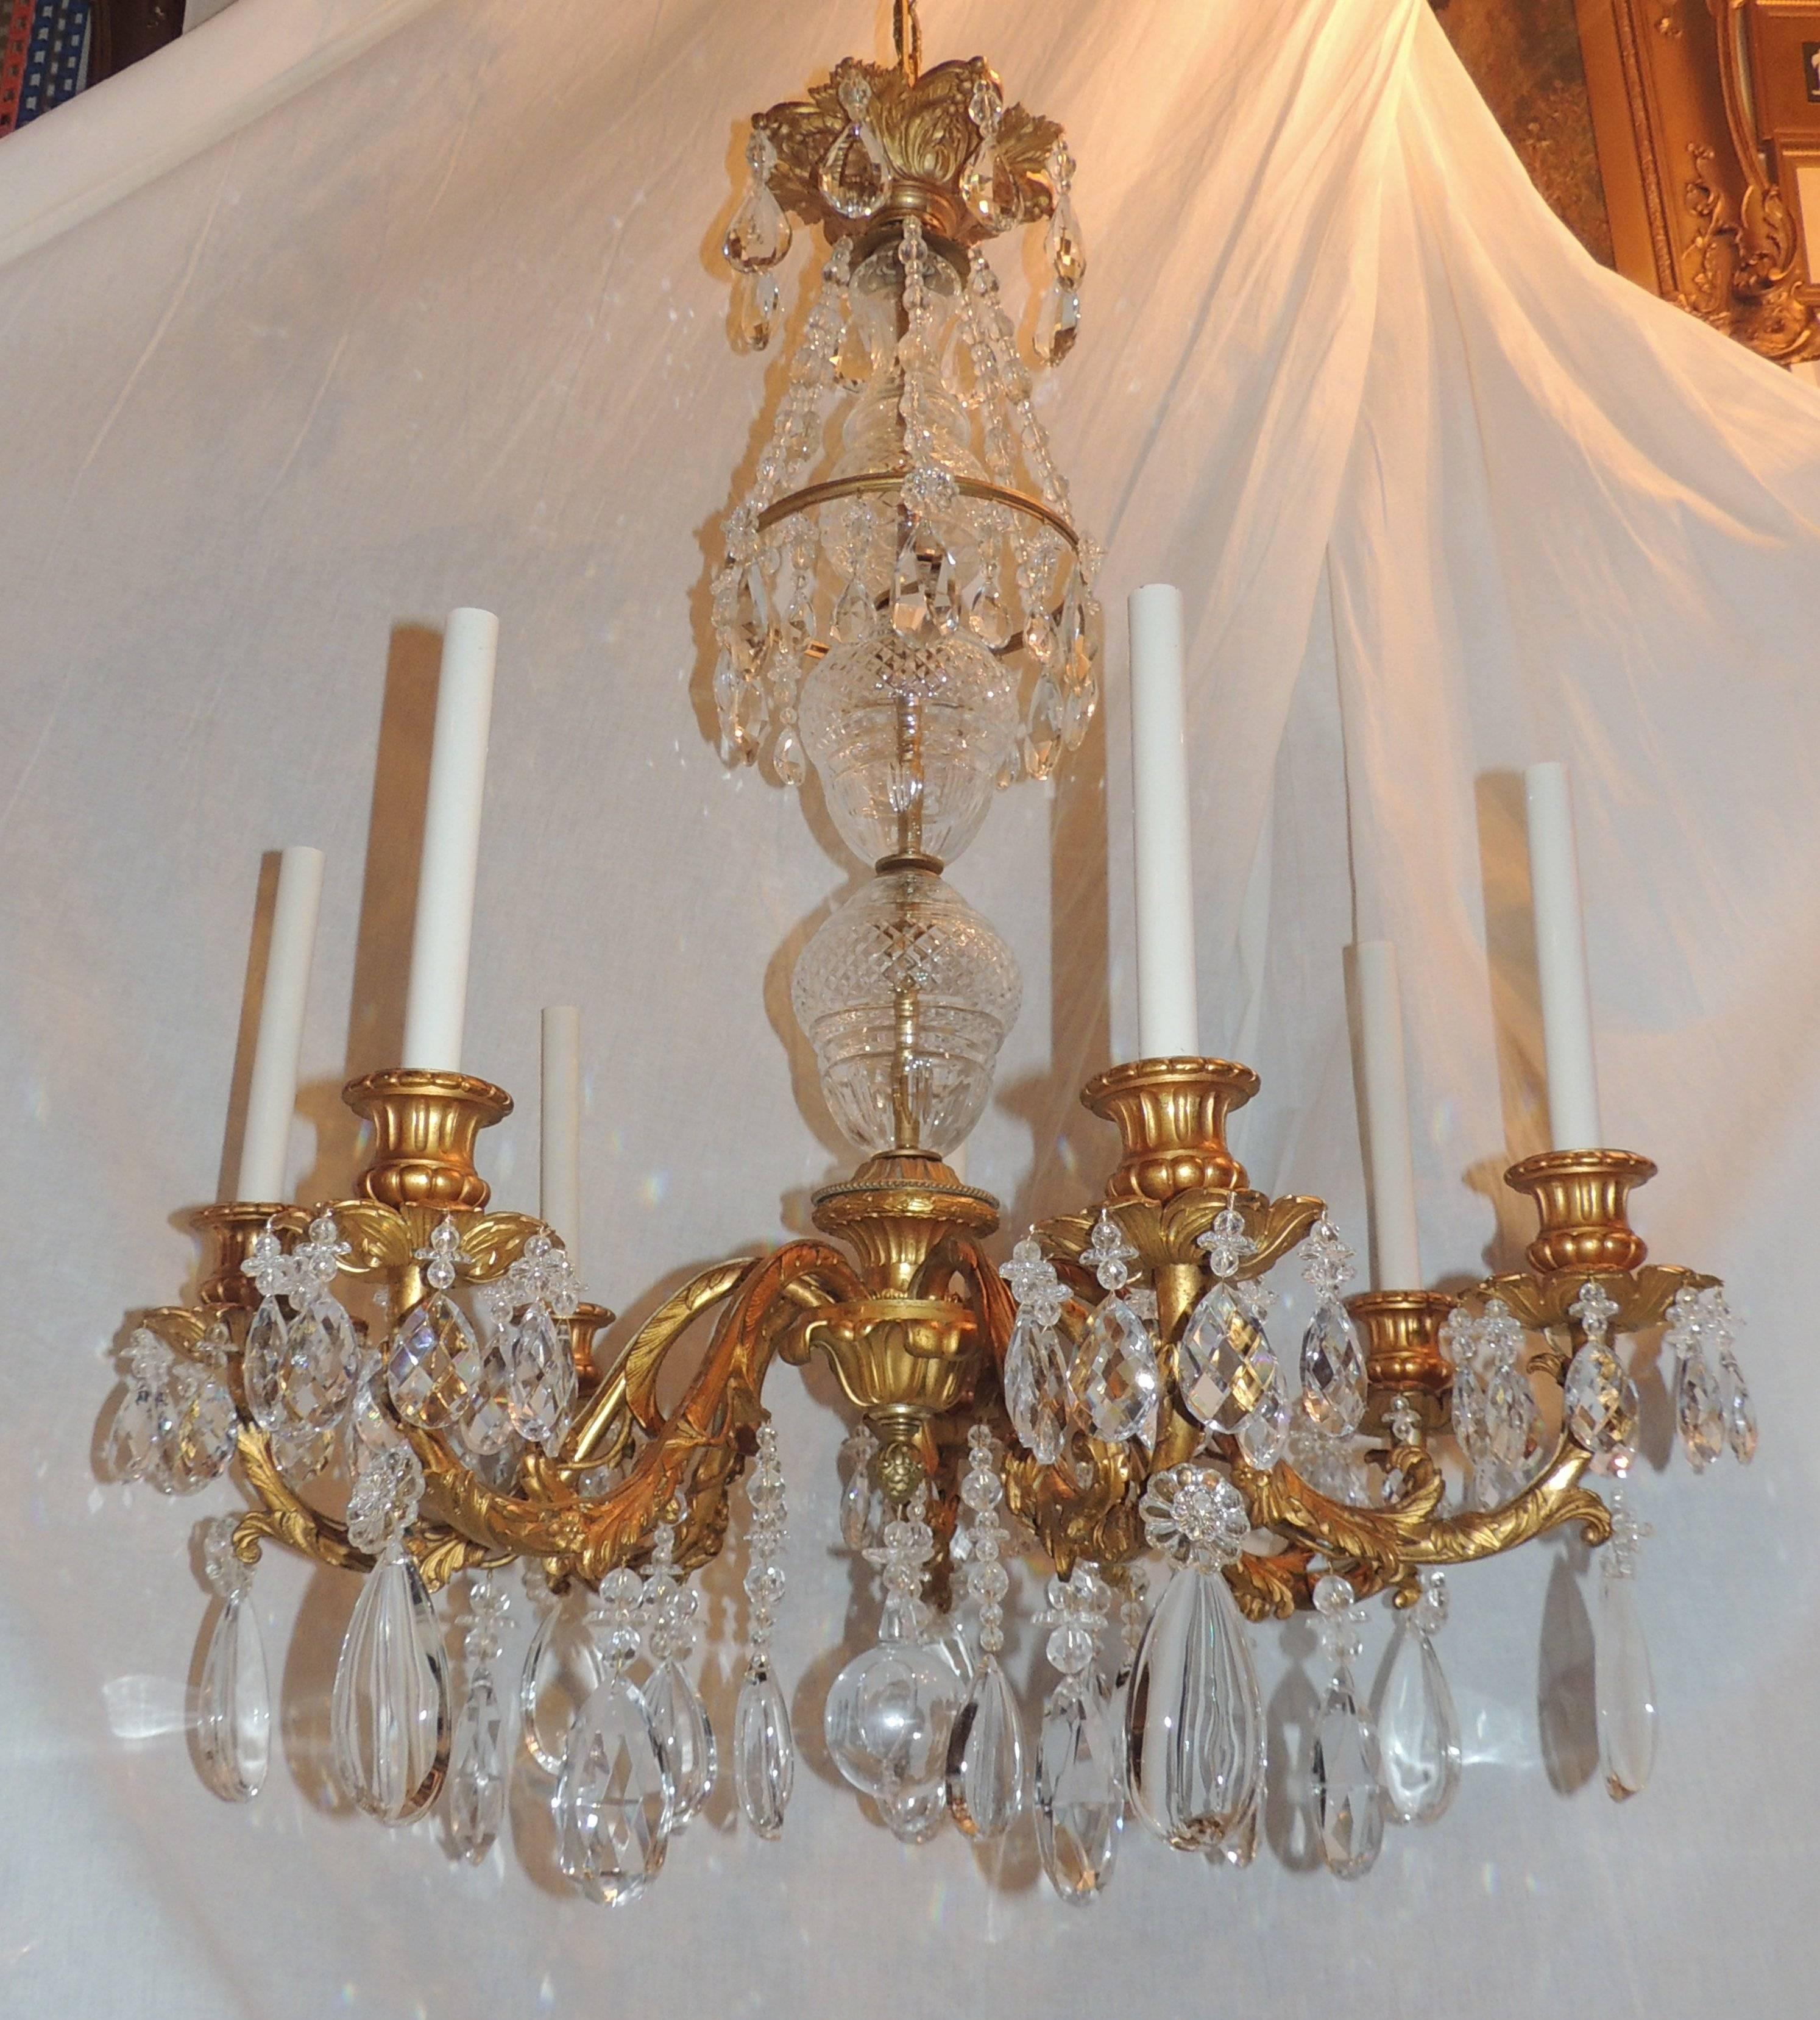 This elegant gilt bronze chandelier has wonderful cut crystal center with seven filigree detailed arms finished with fluted candle cups sitting atop floral bobeches. The crown is draped with crystal drops and flowers and finished with a beautiful